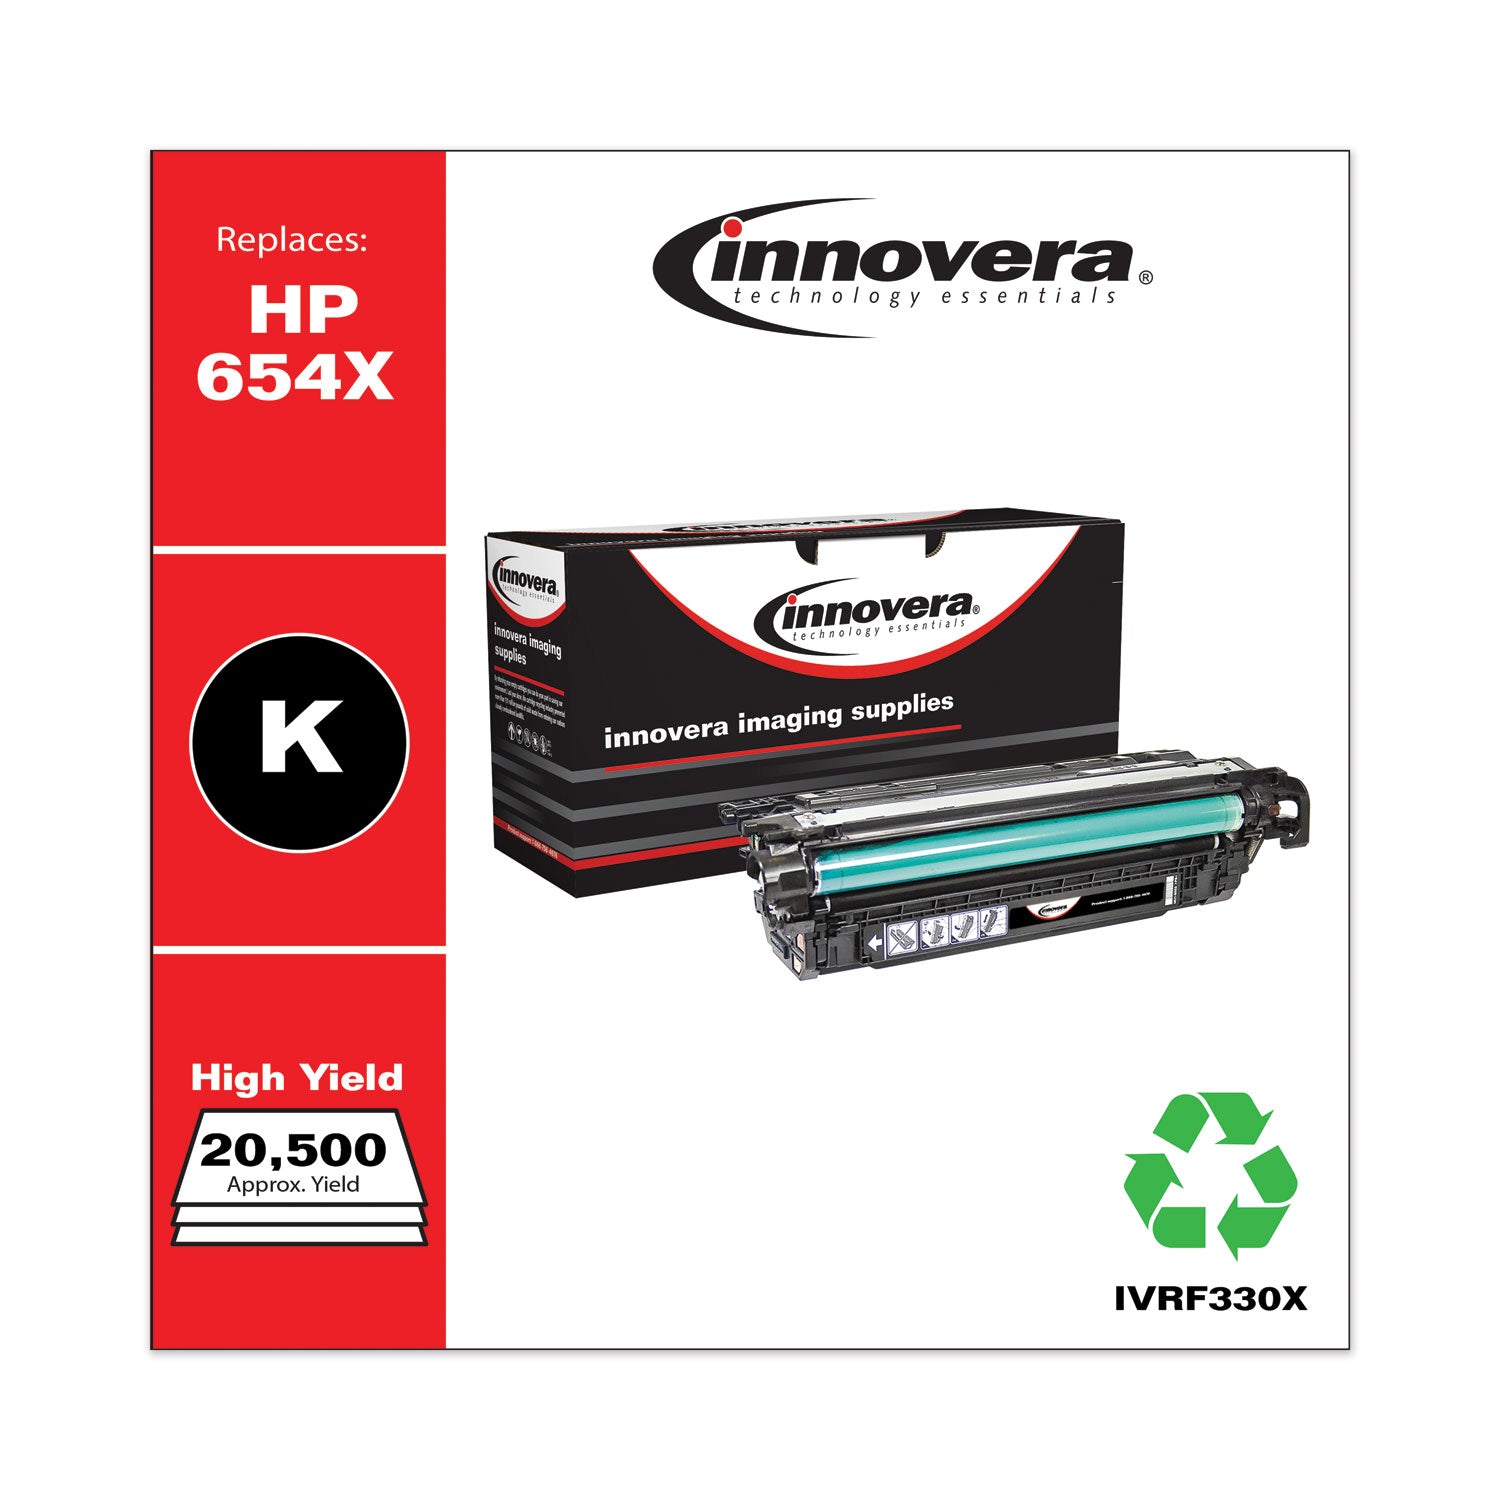 remanufactured-black-high-yield-toner-replacement-for-654x-cf330x-20500-page-yield-ships-in-1-3-business-days_ivrf330x - 2